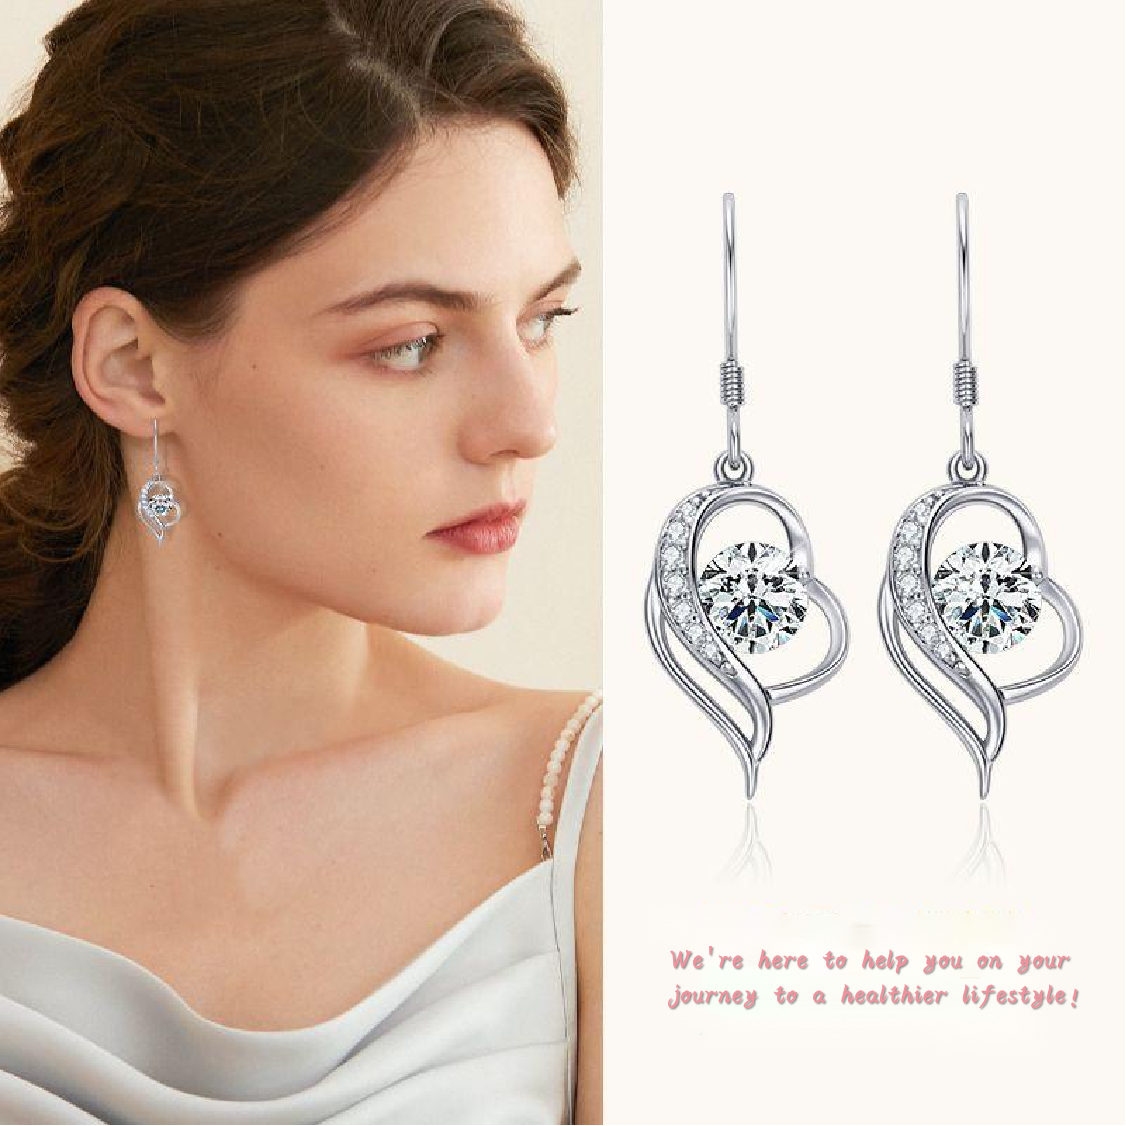 （🔥LAST DAY SALE-80% OFF) Moissan Masonite Lymphatic Drainage Earring